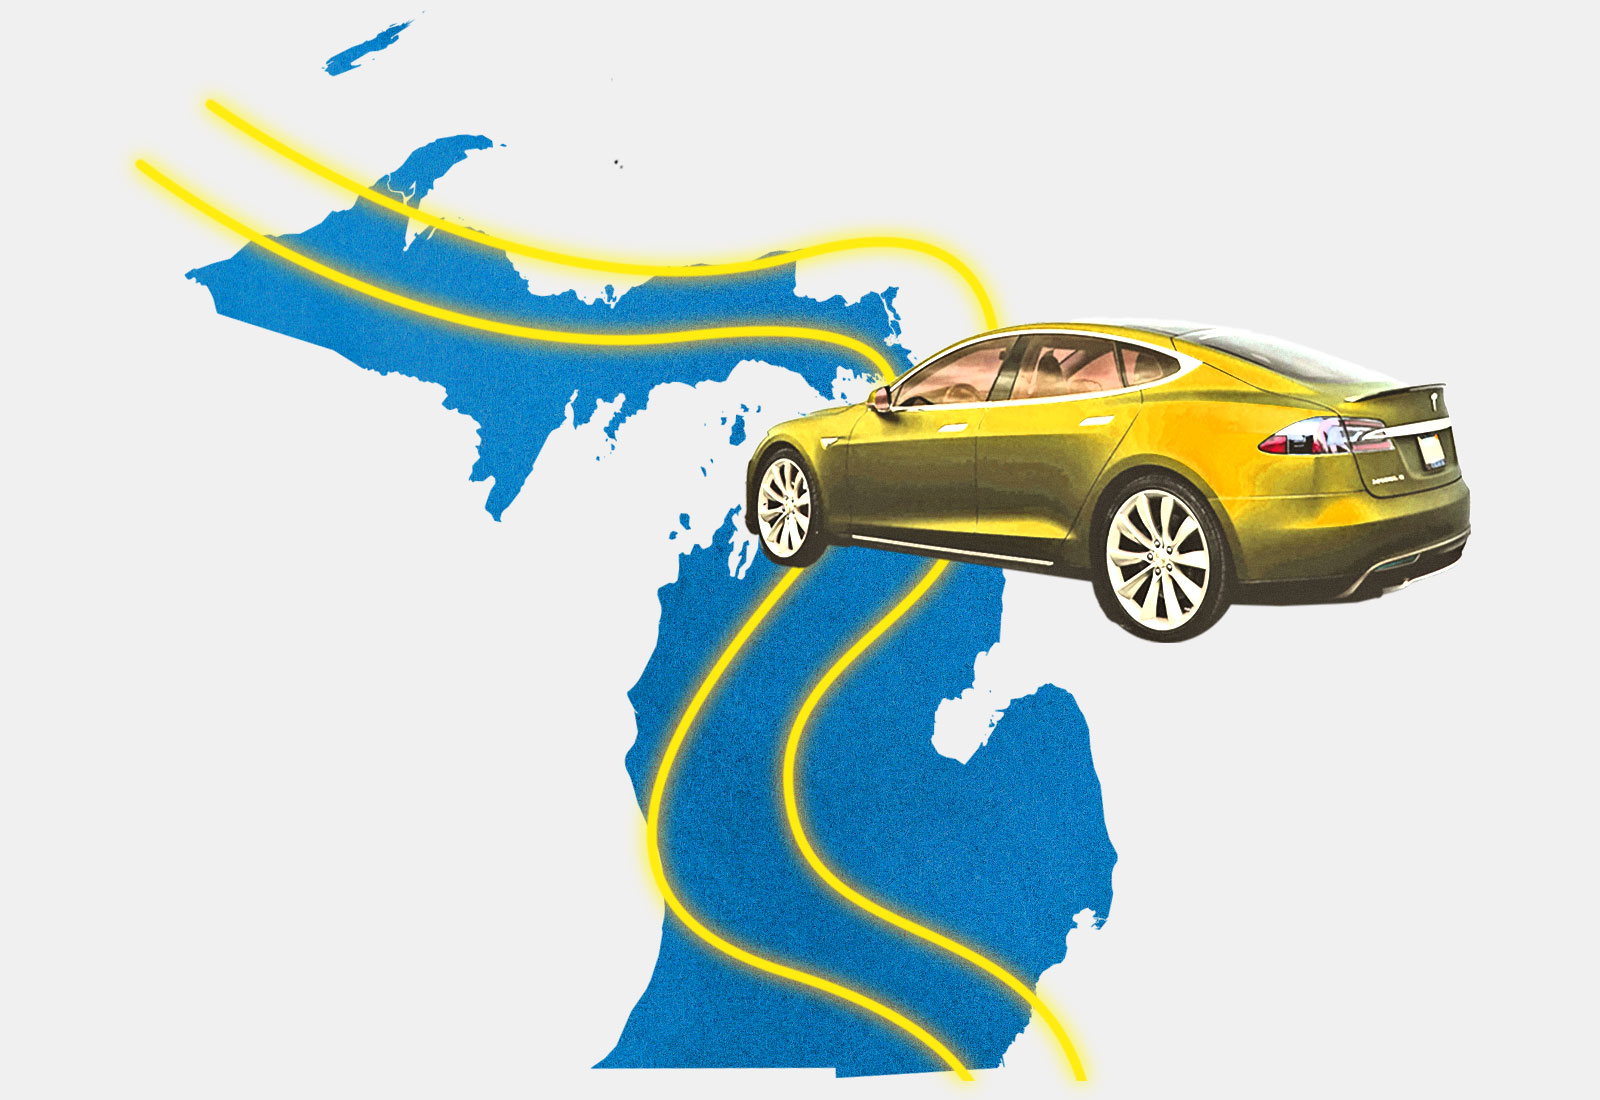 Electric car with neon lines representing roads on top of Michigan